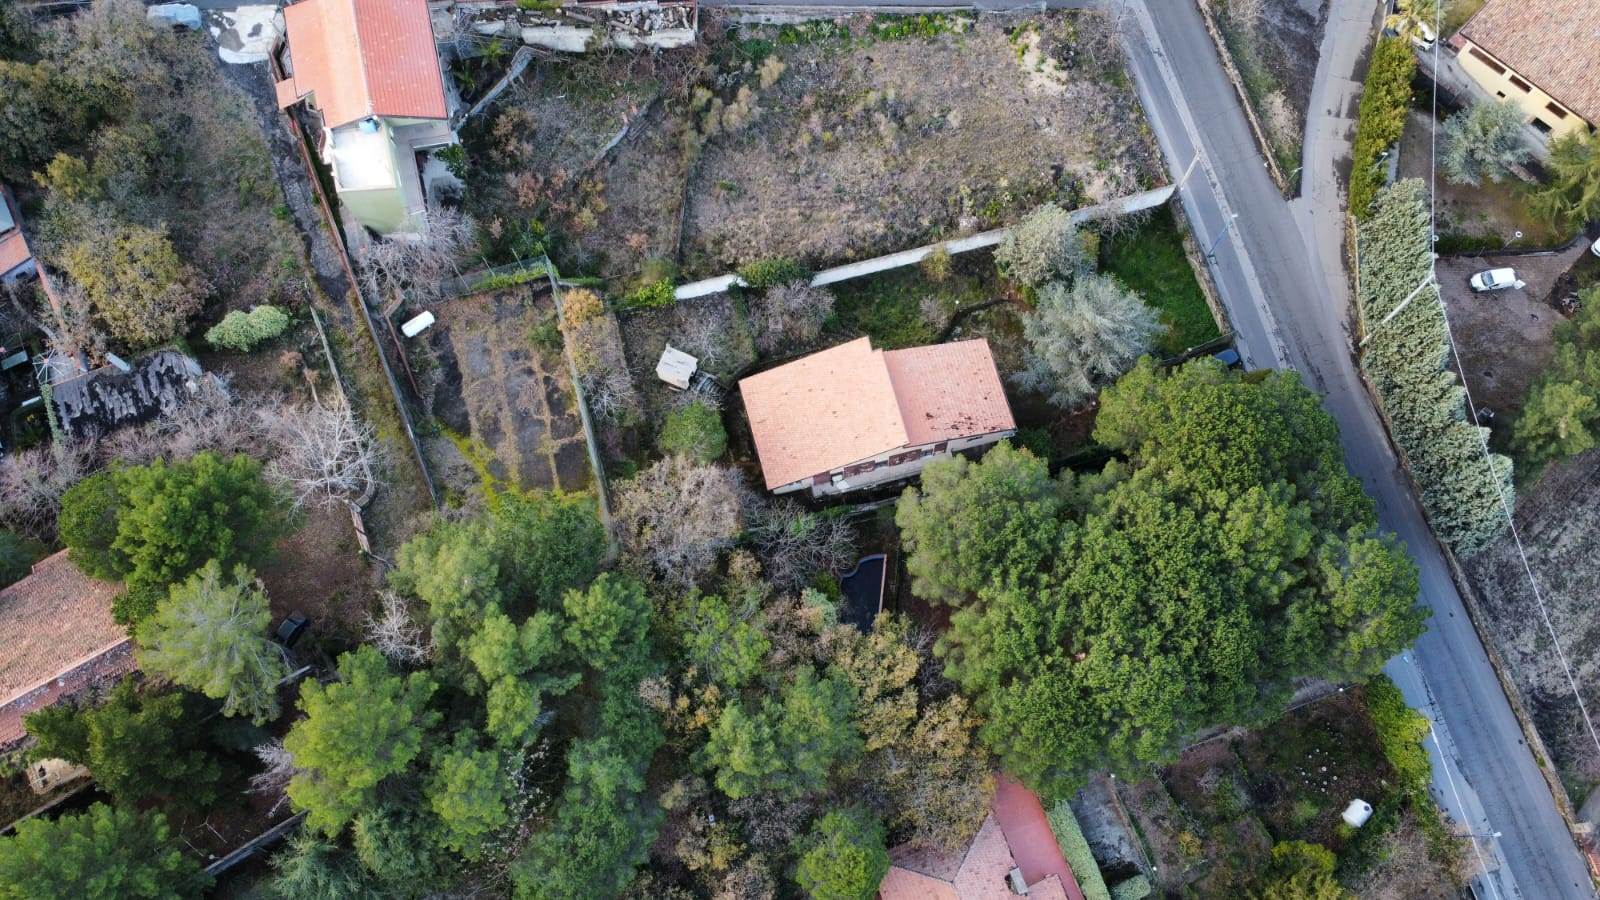 PEDARA, Villa for sale of 166 Sq. mt., Be restored, Heating Non-existent, Energetic class: G, composed by: 8 Rooms, Separate kitchen, , Garden, 